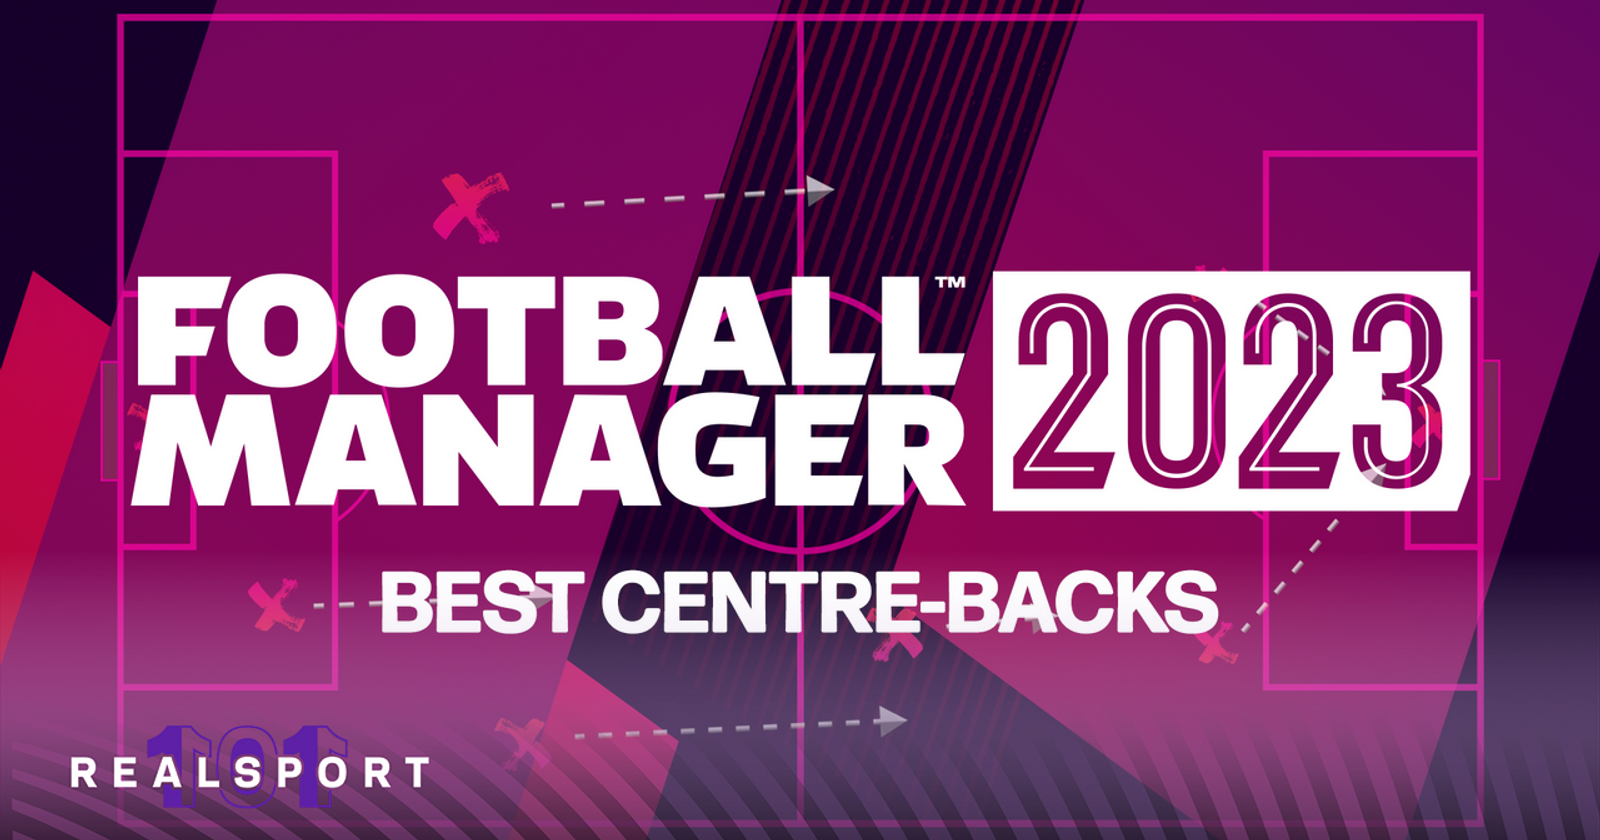 Football Manager 2023 Best Centre-Backs: Dominant defenders you